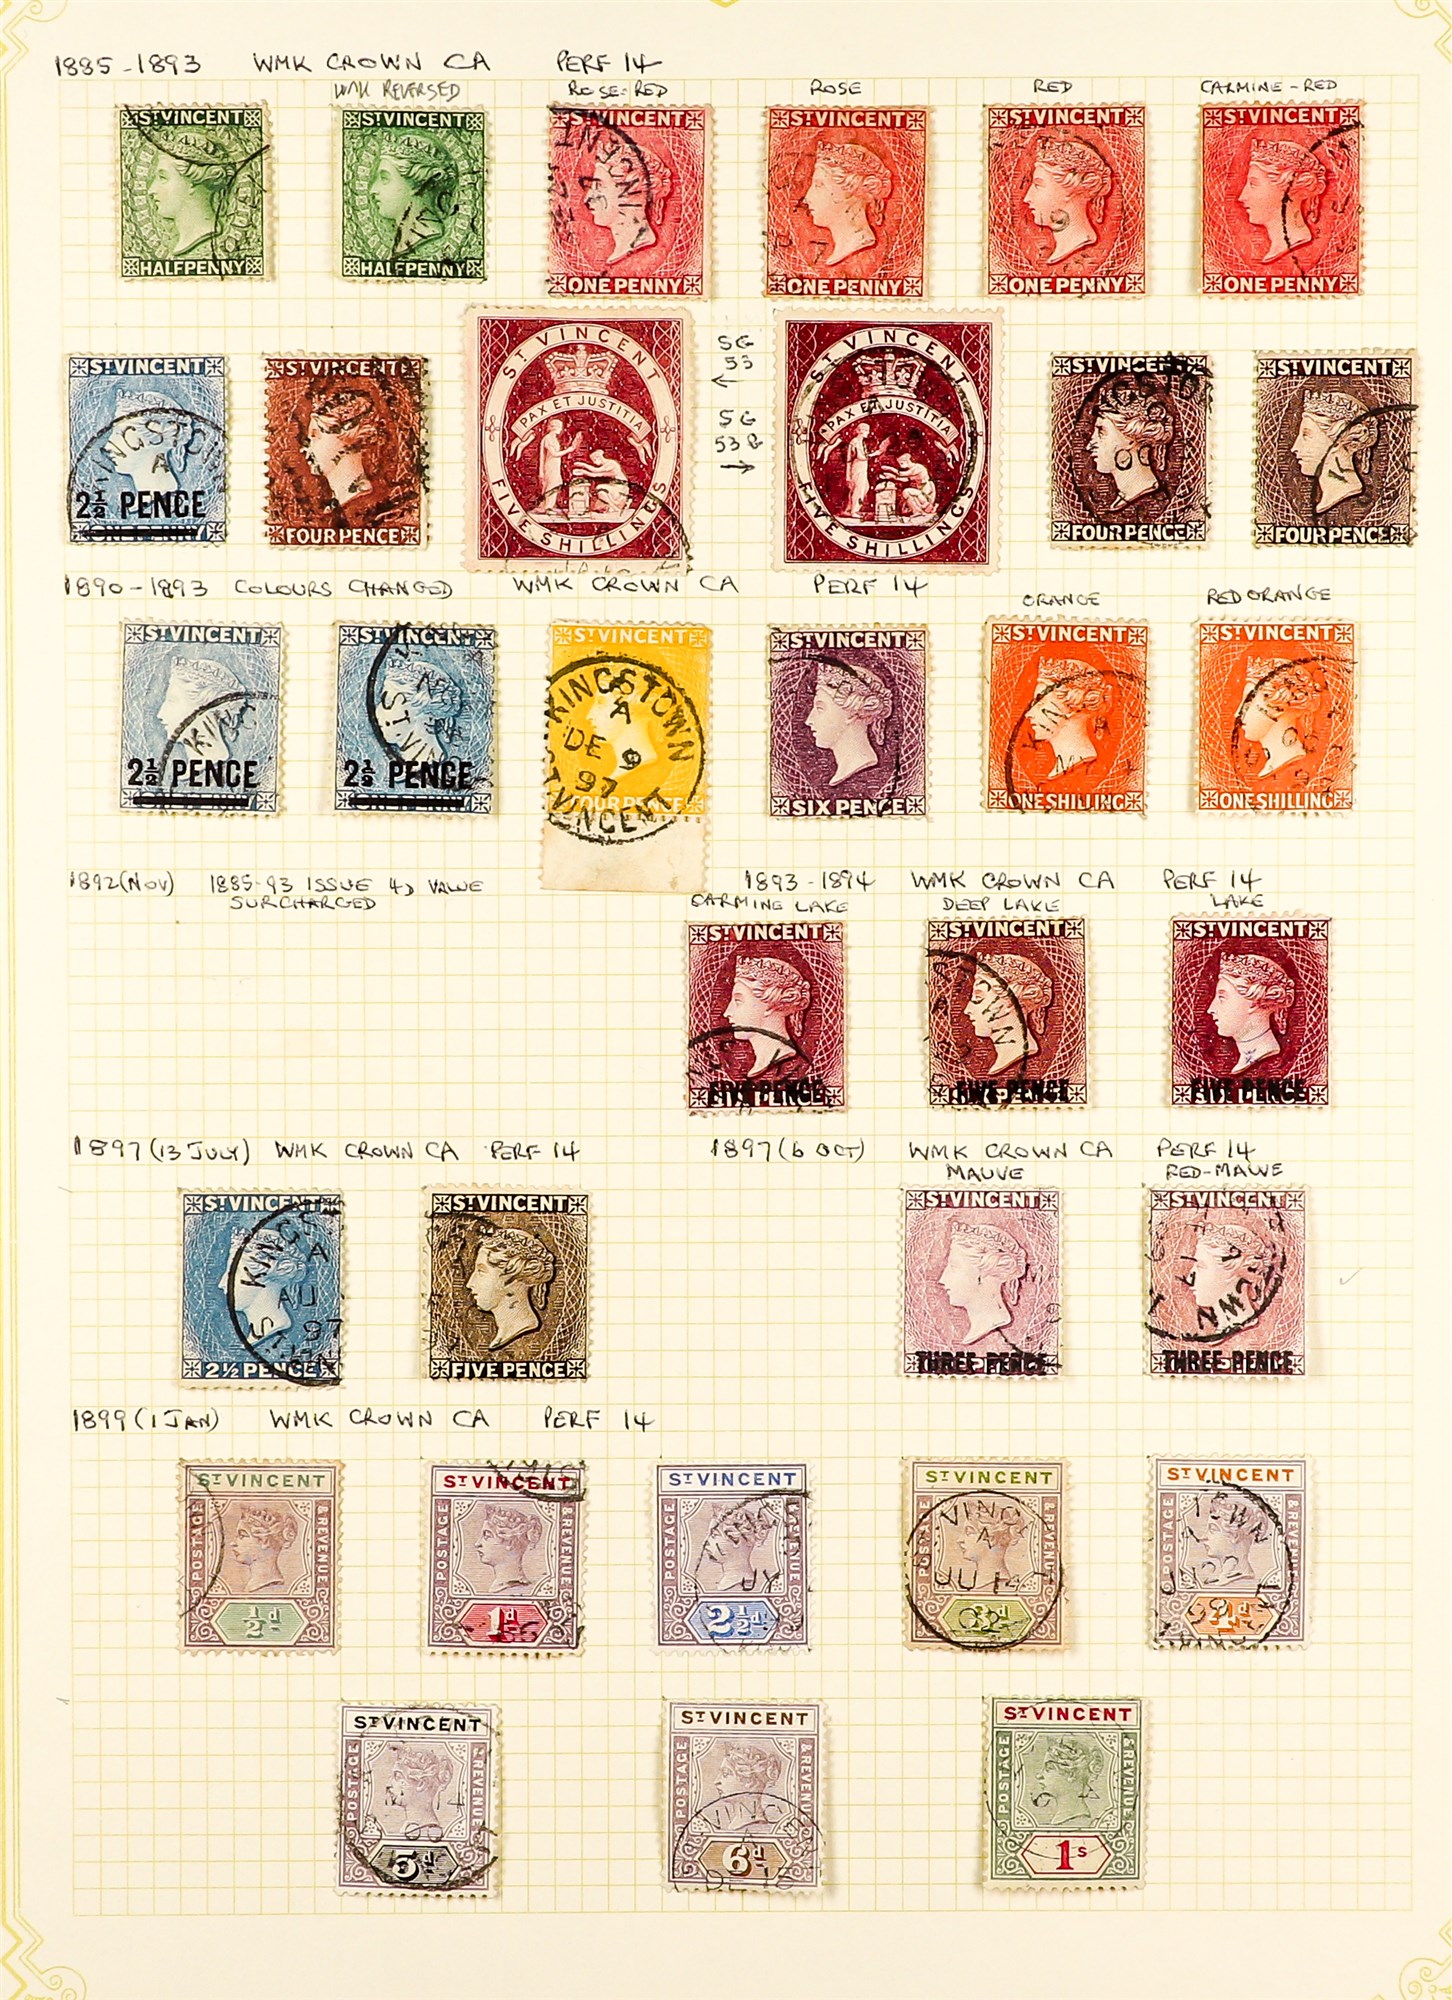 ST VINCENT 1861 - 1899 USED COLLECTION of over 60 stamps on pages, note 1861 1d, 1862 6d, 1862-68 - Image 2 of 2